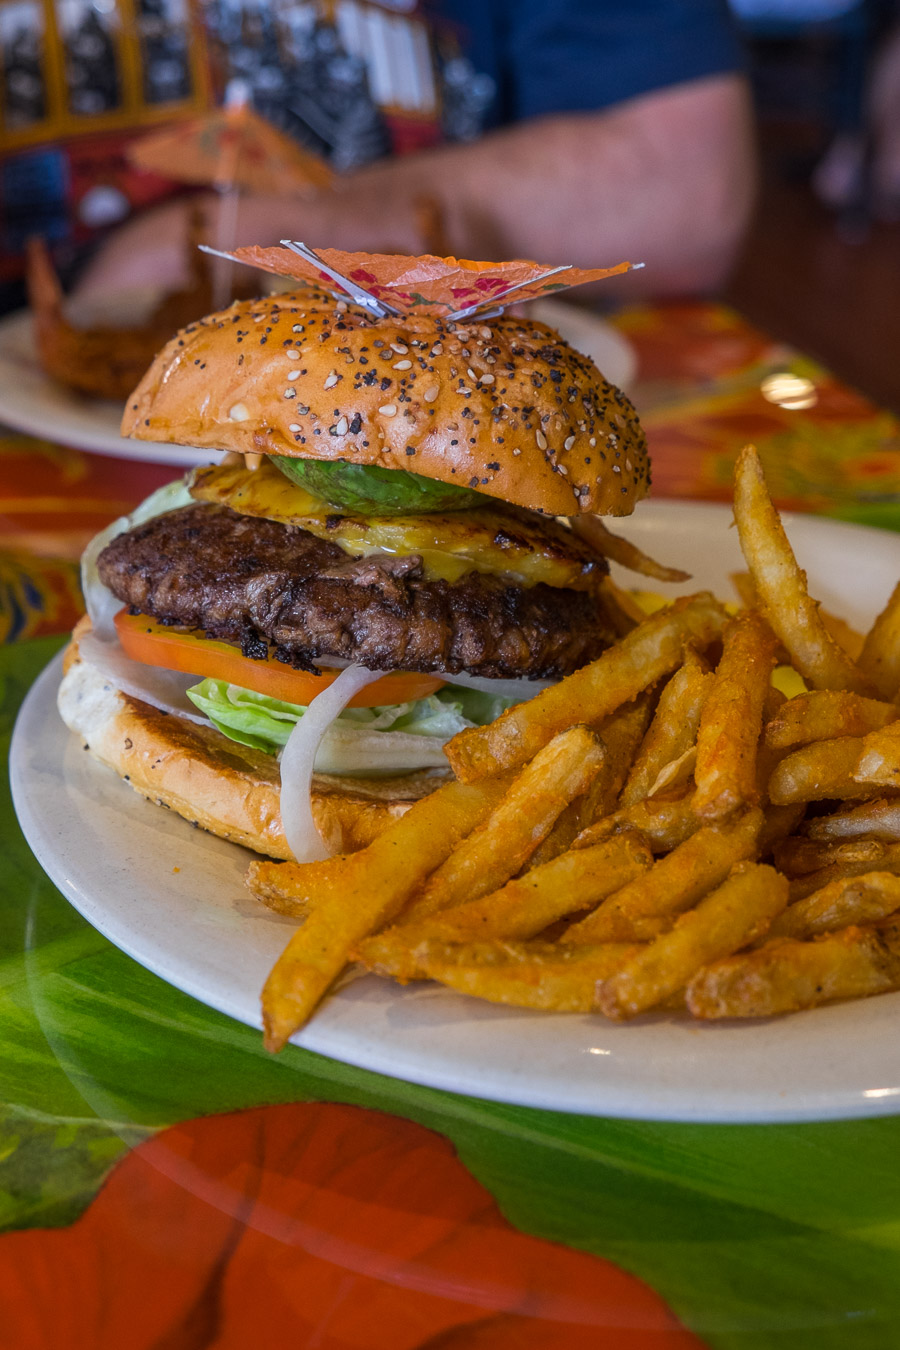 California Cheeseburger - with fresh grilled Hawaiian pineapple and California avocado slices (US$12.99). Fries on the side US$2.49